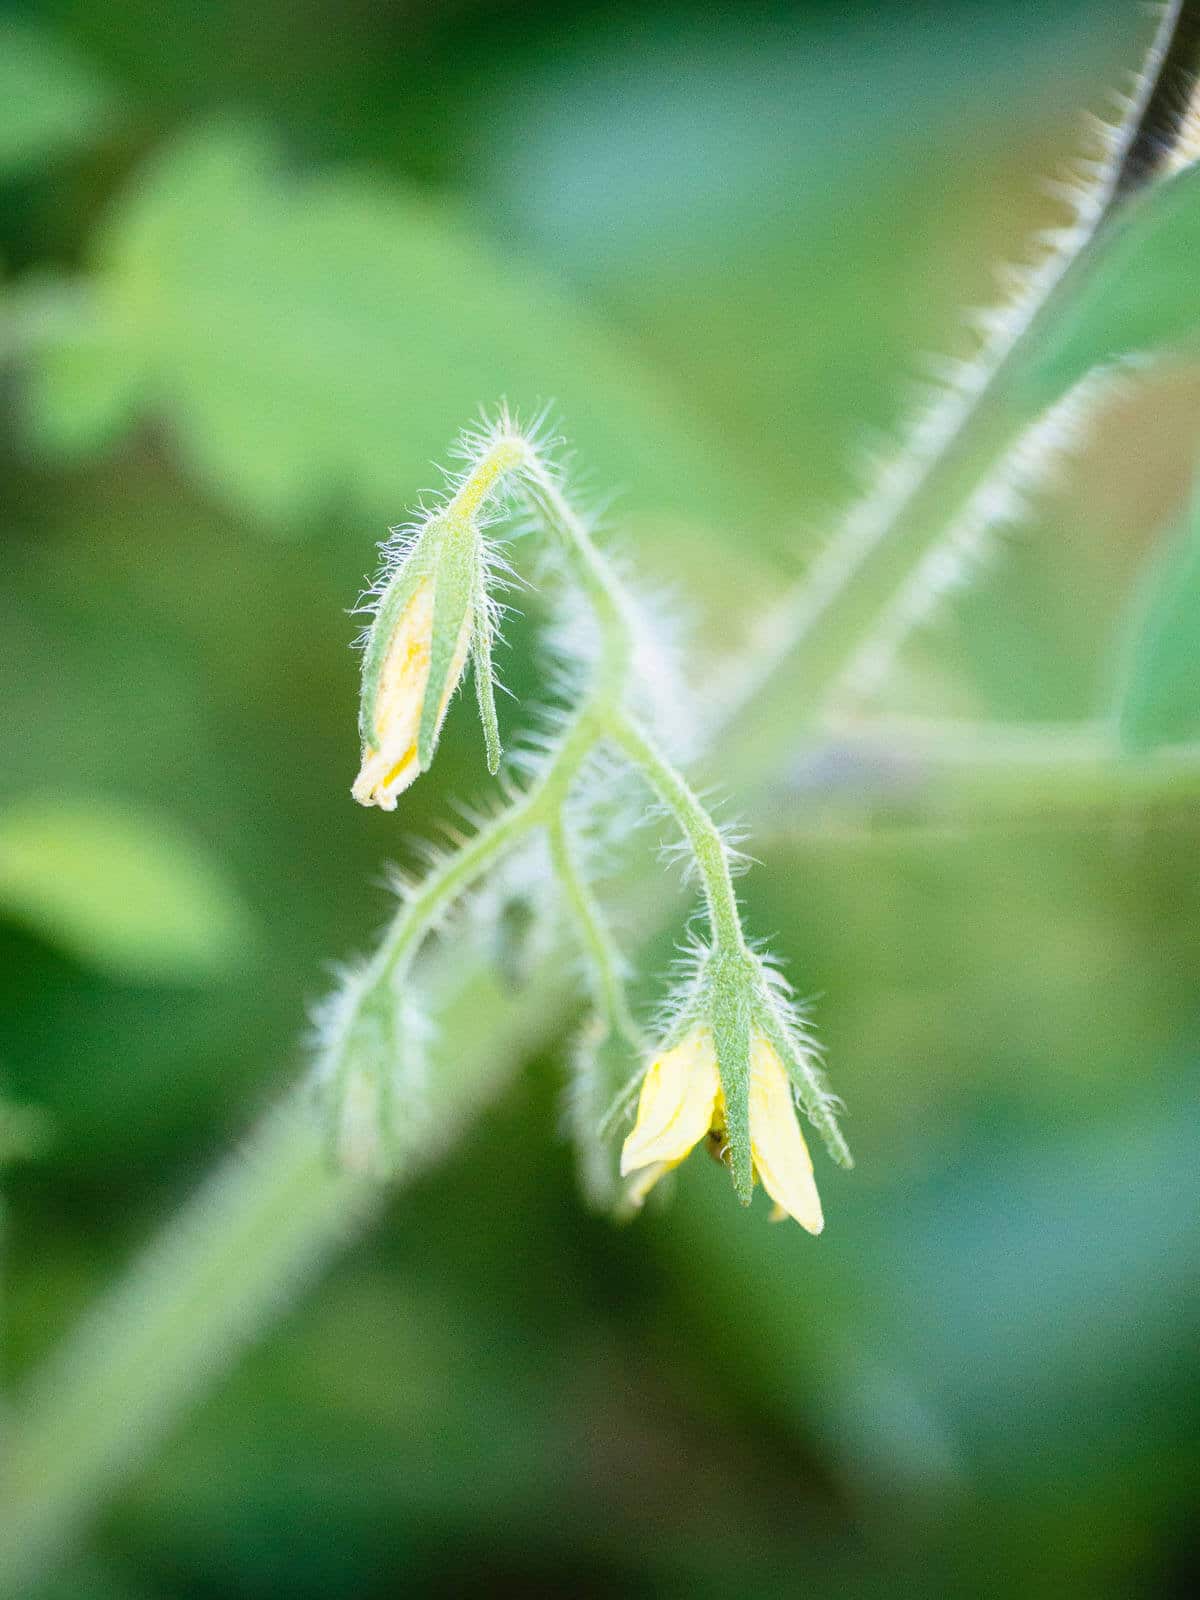 Tomato trichomes on sepals